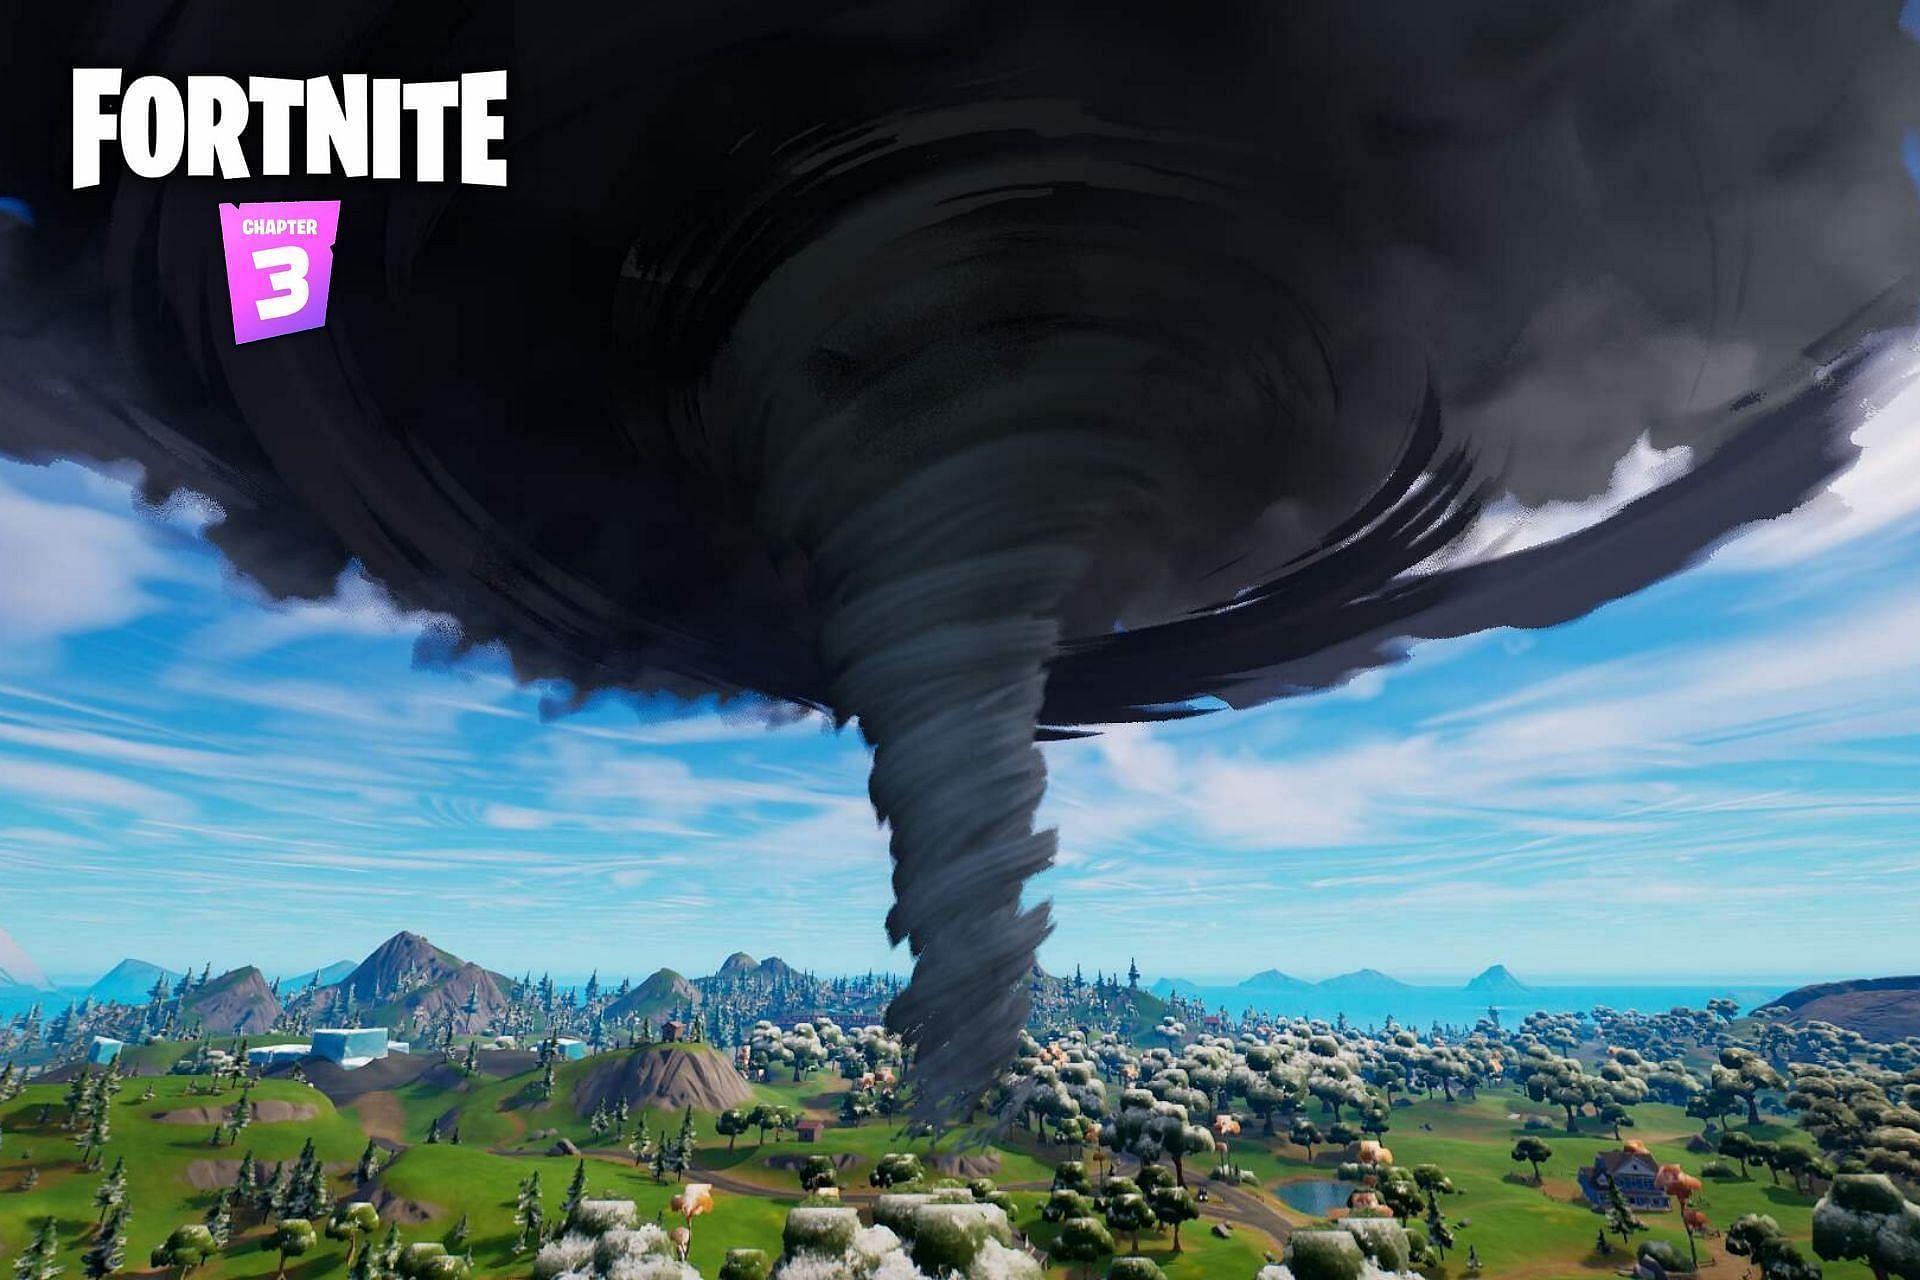 Lightning and tornadoes in Fortnite are live now (Image via Epic Games)